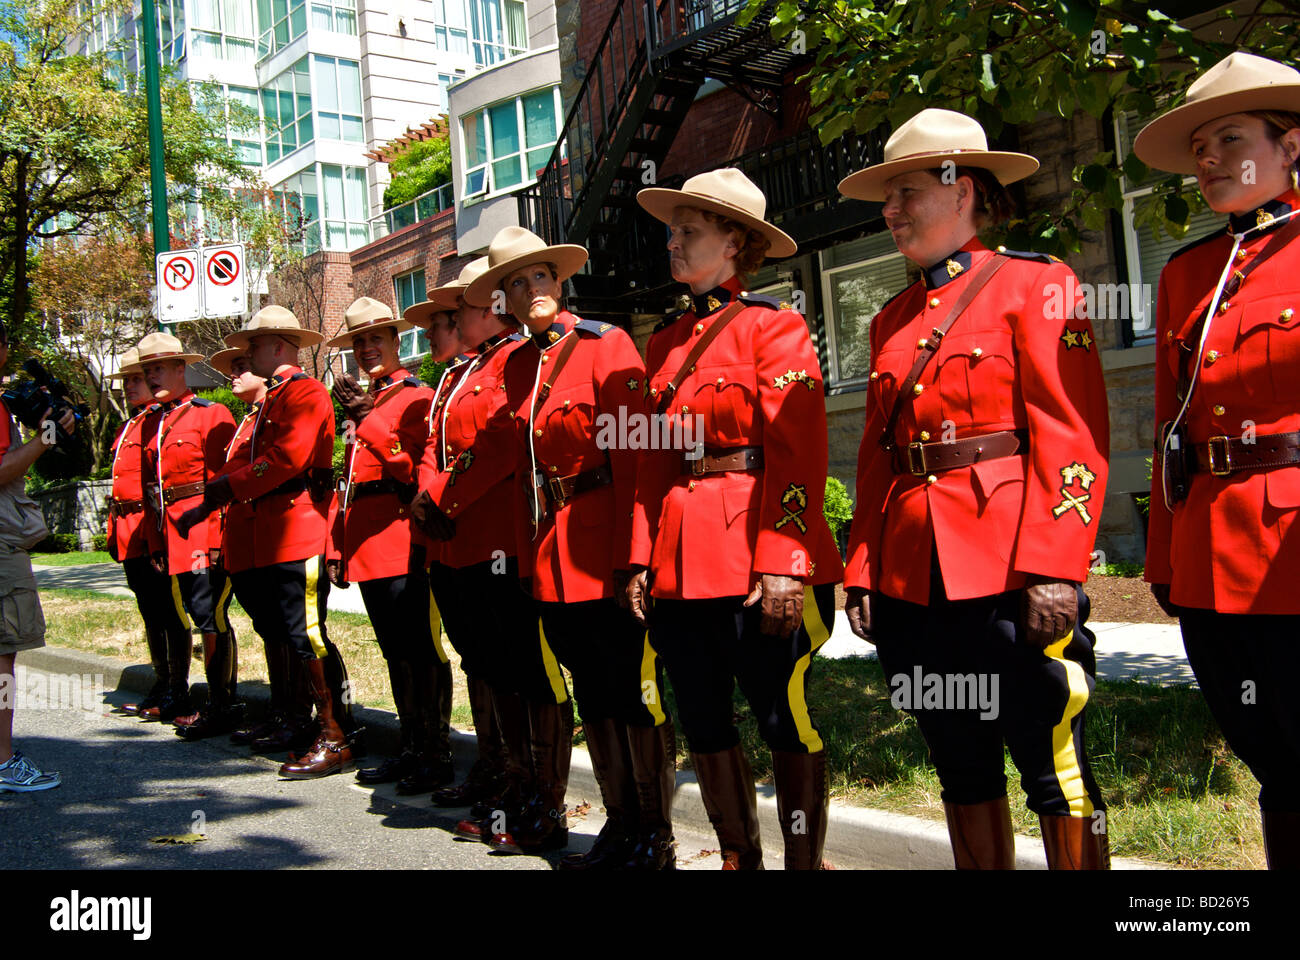 Royal Canadian Mounted Police in red serge ceremonial uniforms preparing to participate in Vancouver Gay Pride parade Stock Photo